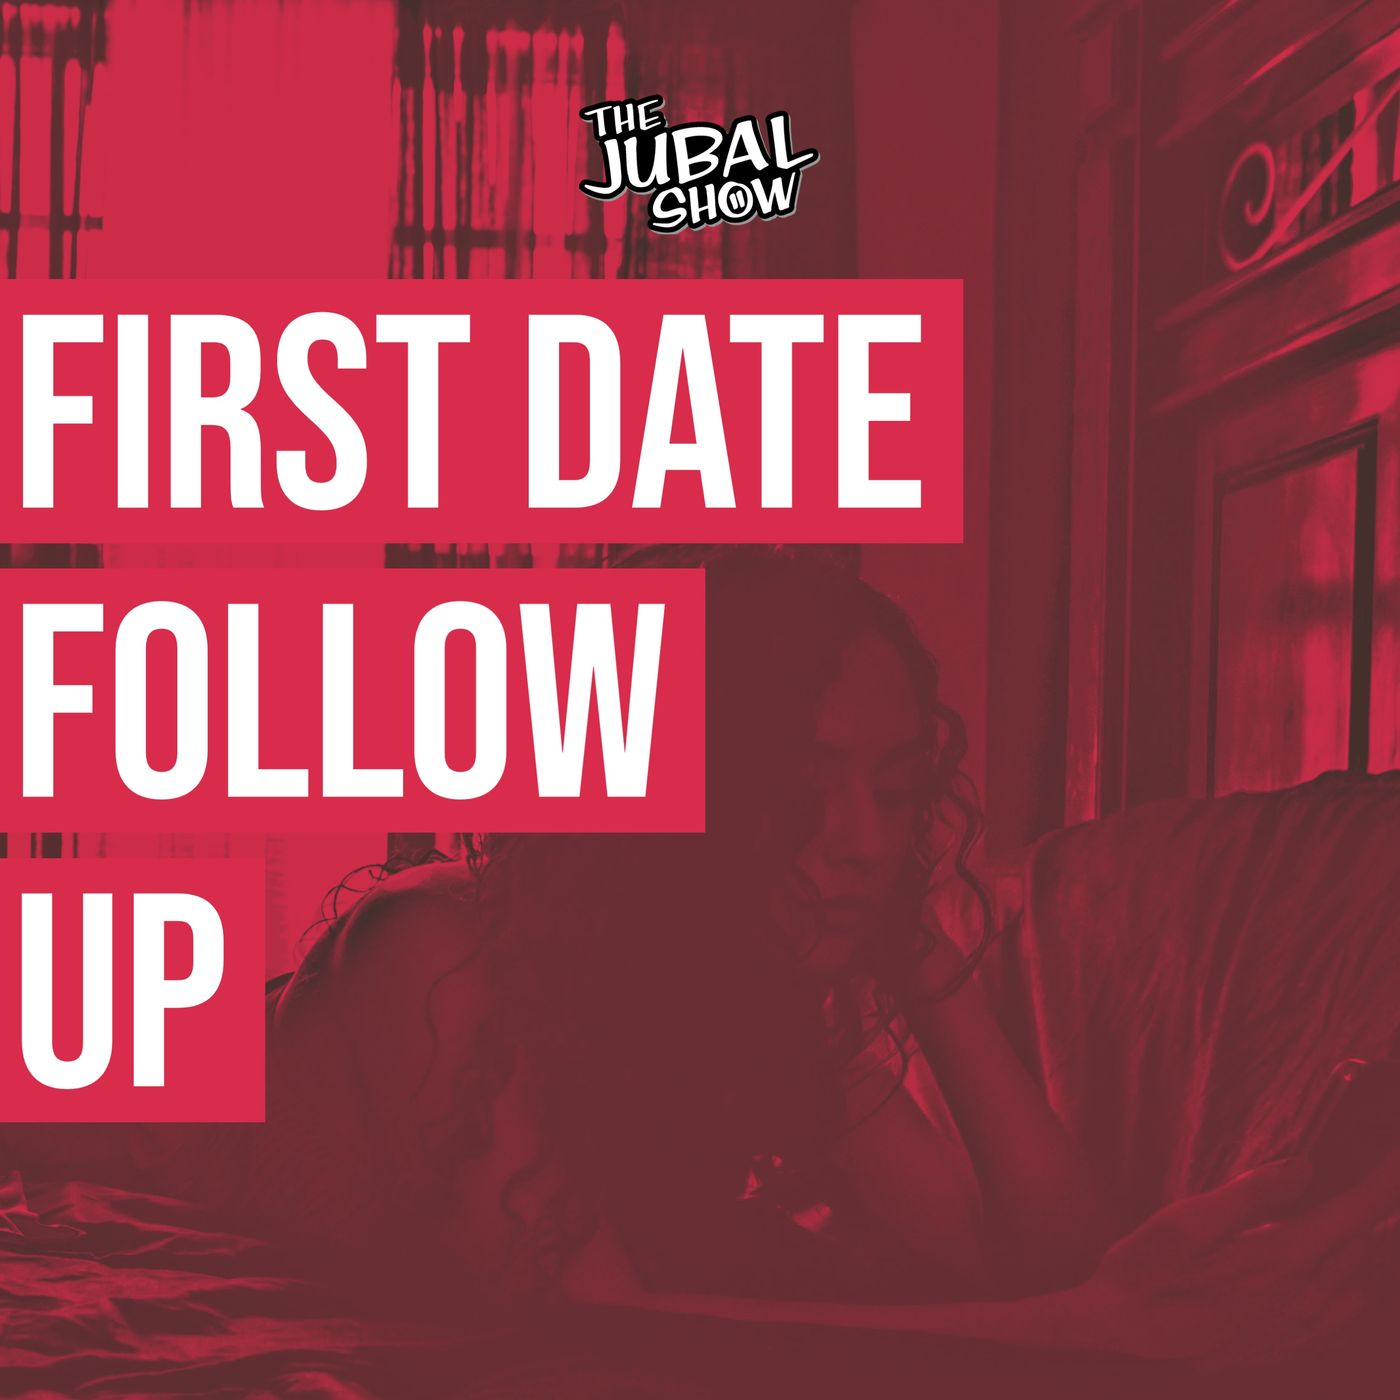 Is it a red flag if you lie on a first date?